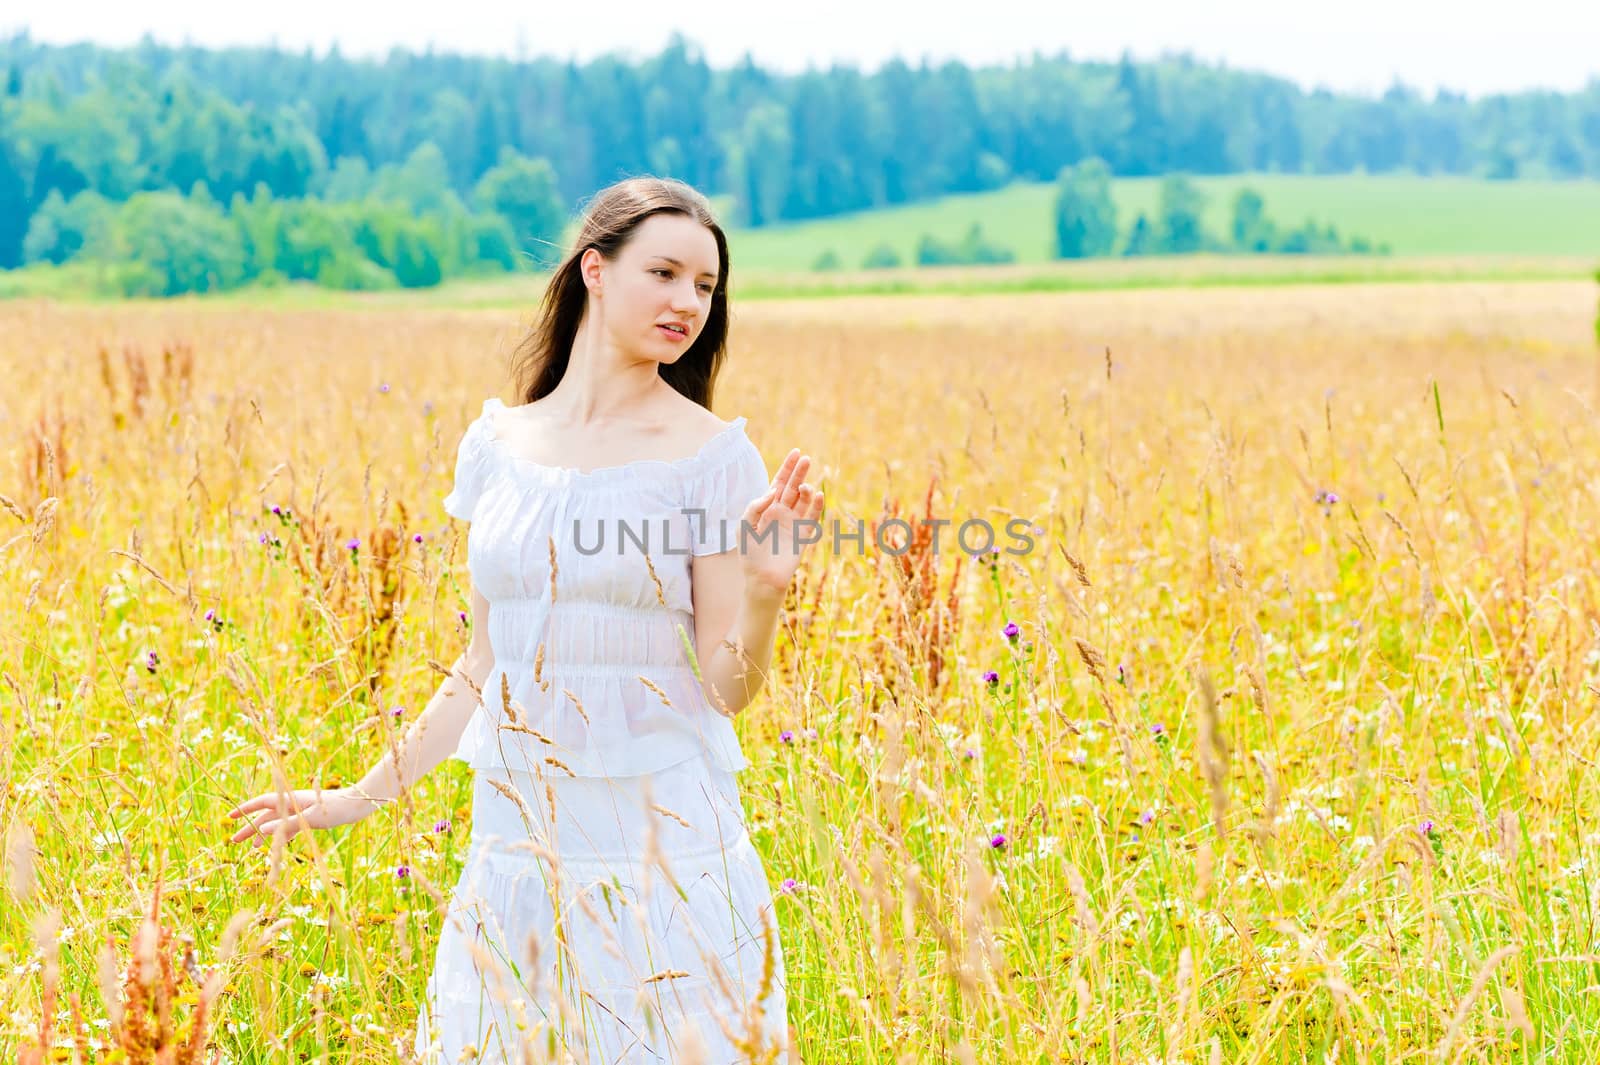 charming brunette in a field of yellow flowers by kosmsos111